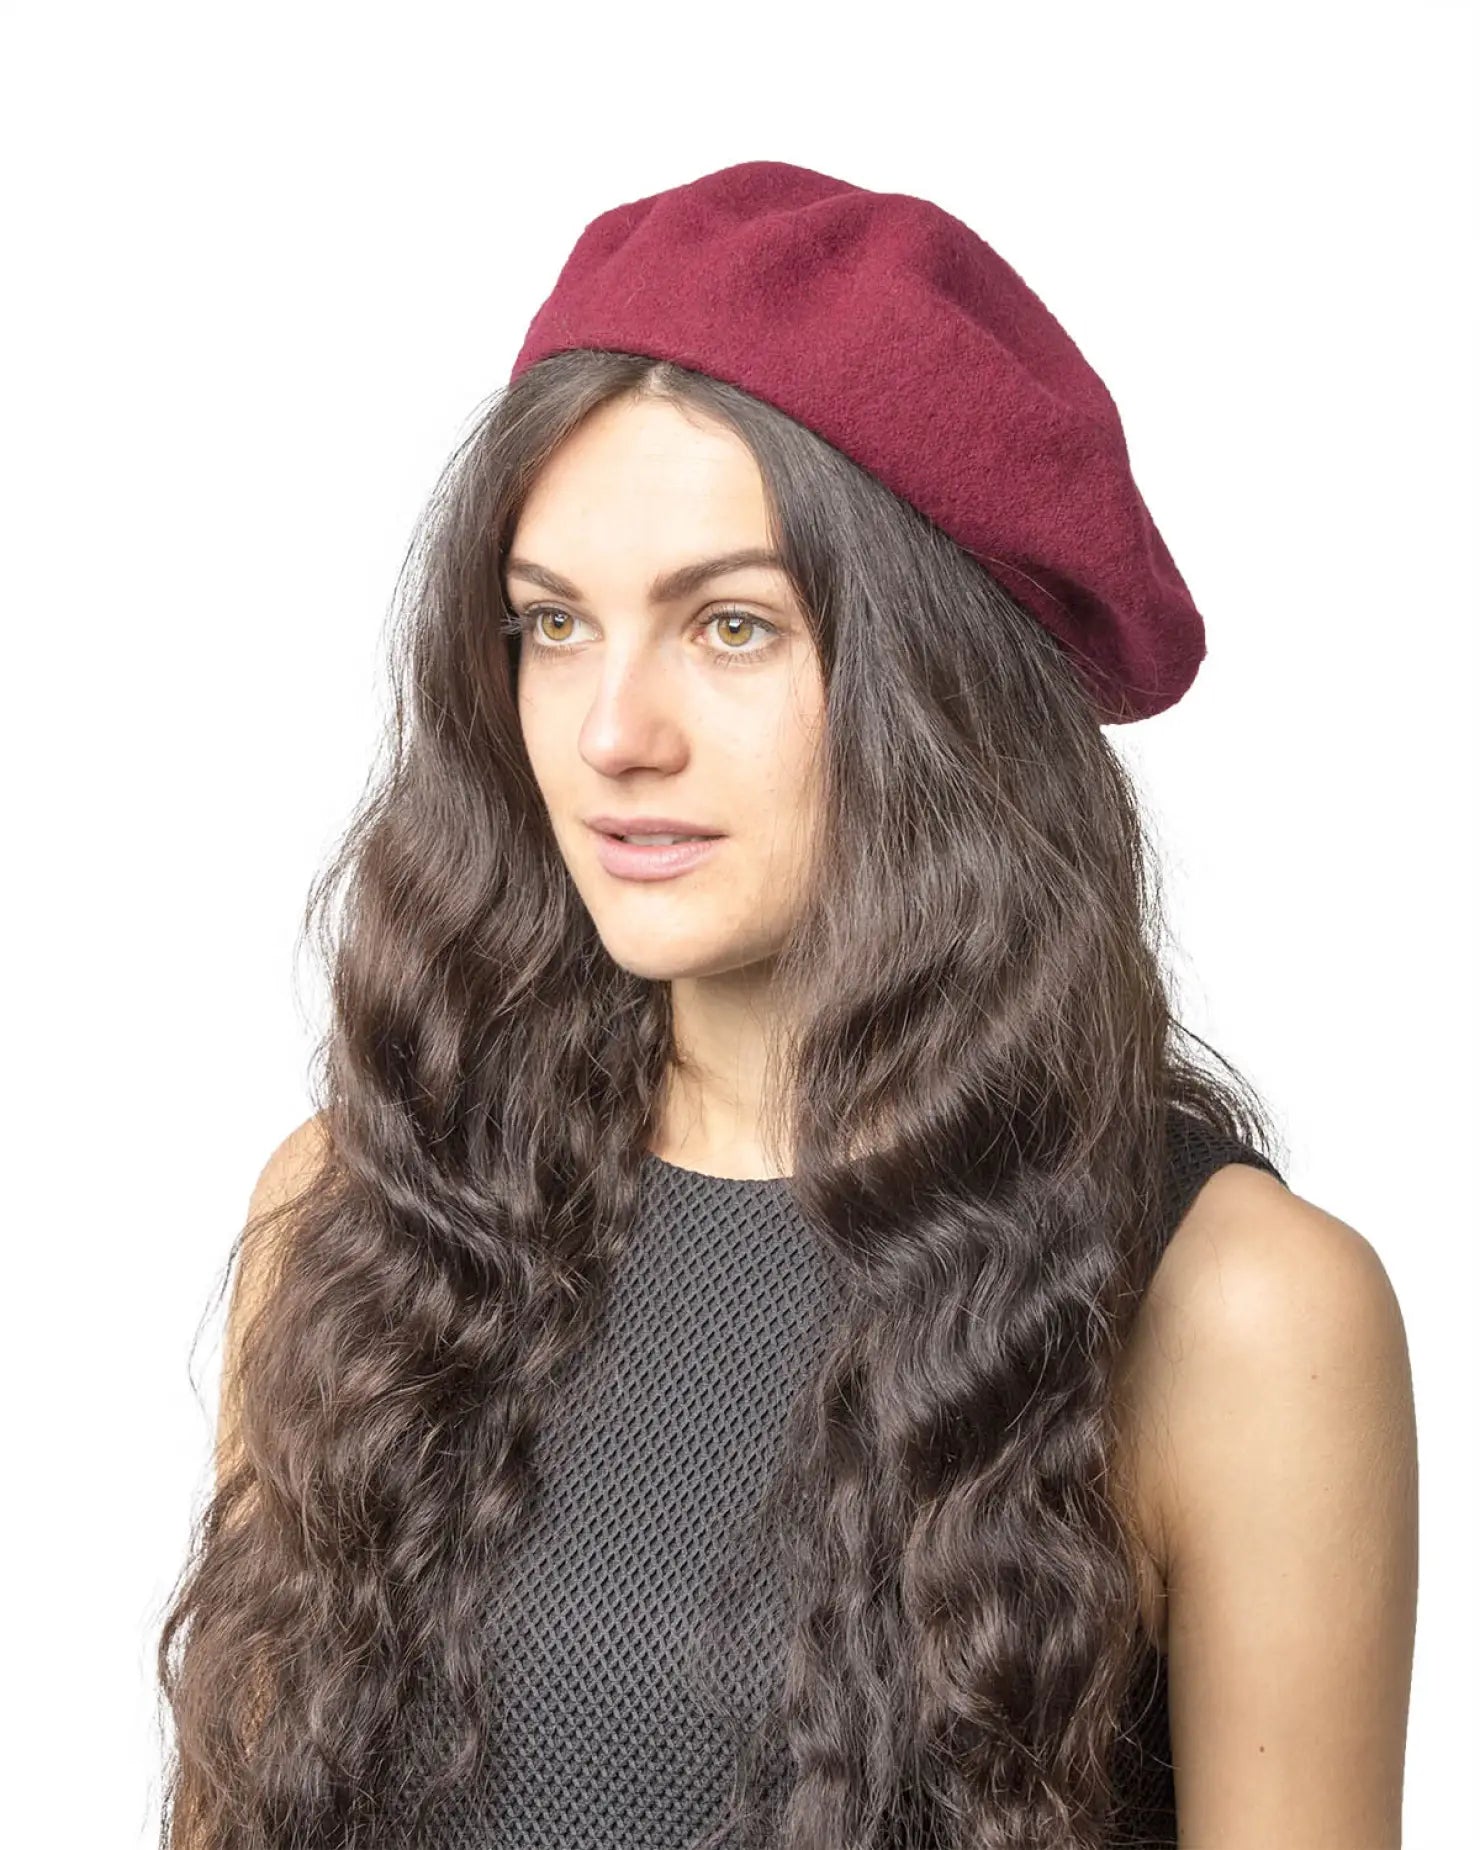 Stylish woman in red beret, French wool beret.